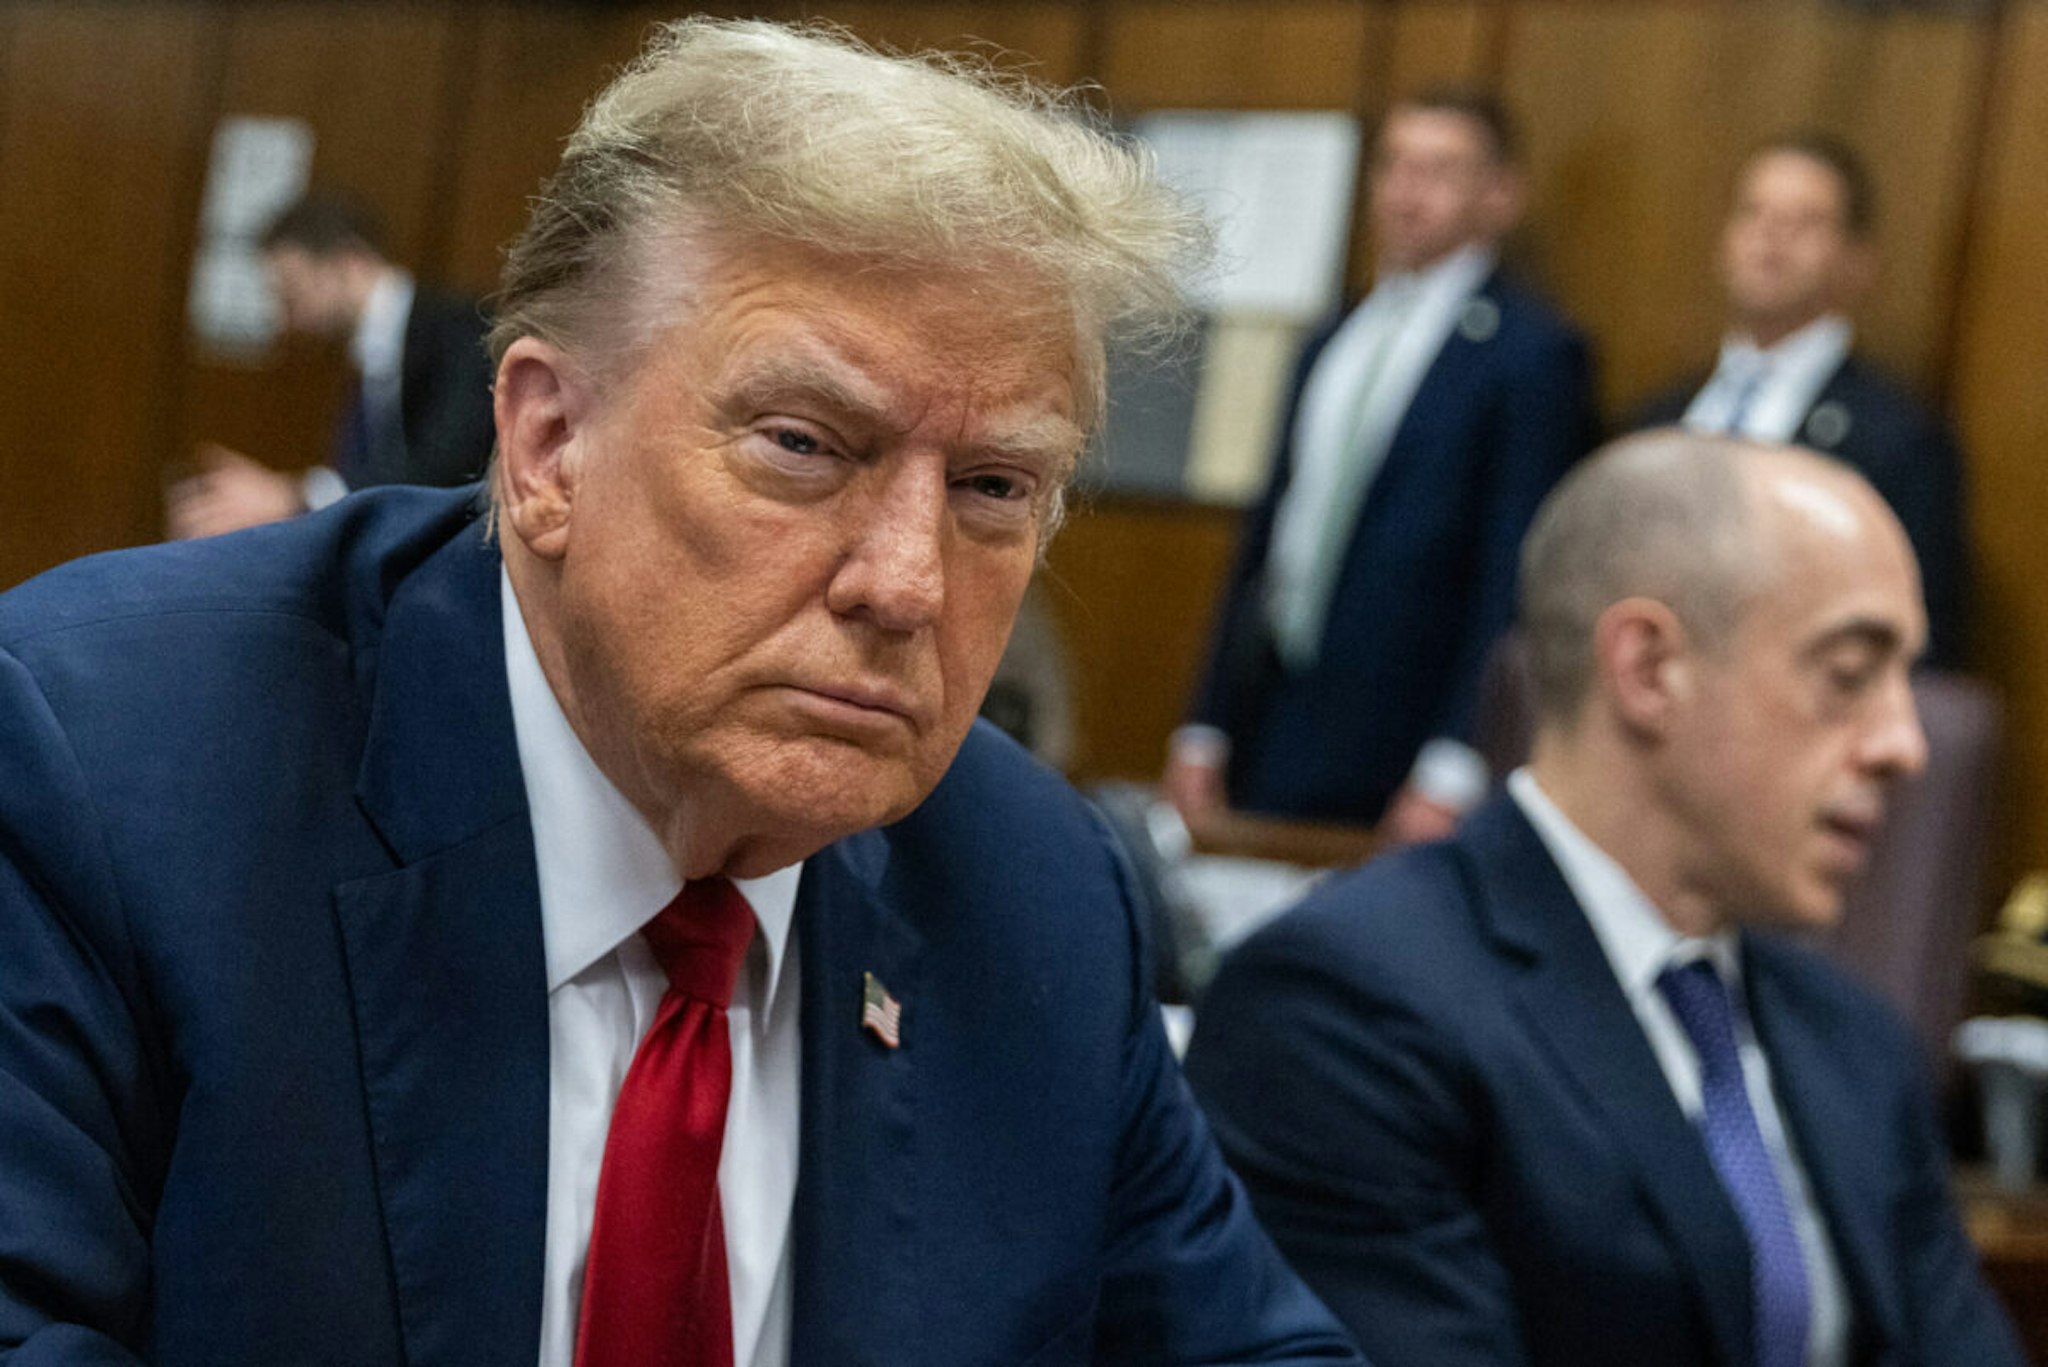 Former US President Donald Trump looks on at Manhattan criminal court in New York, on Monday, April 15, 2024. Donald Trump is in court Monday as the first US ex-president ever to be criminally prosecuted, a seismic moment for the United States as the presumptive Republican nominee campaigns to re-take the White House. The scandal-plagued 77-year-old is accused of falsifying business records in a scheme to cover up an alleged sexual encounter with adult film actress Stormy Daniels to shield his 2016 election campaign from adverse publicity.